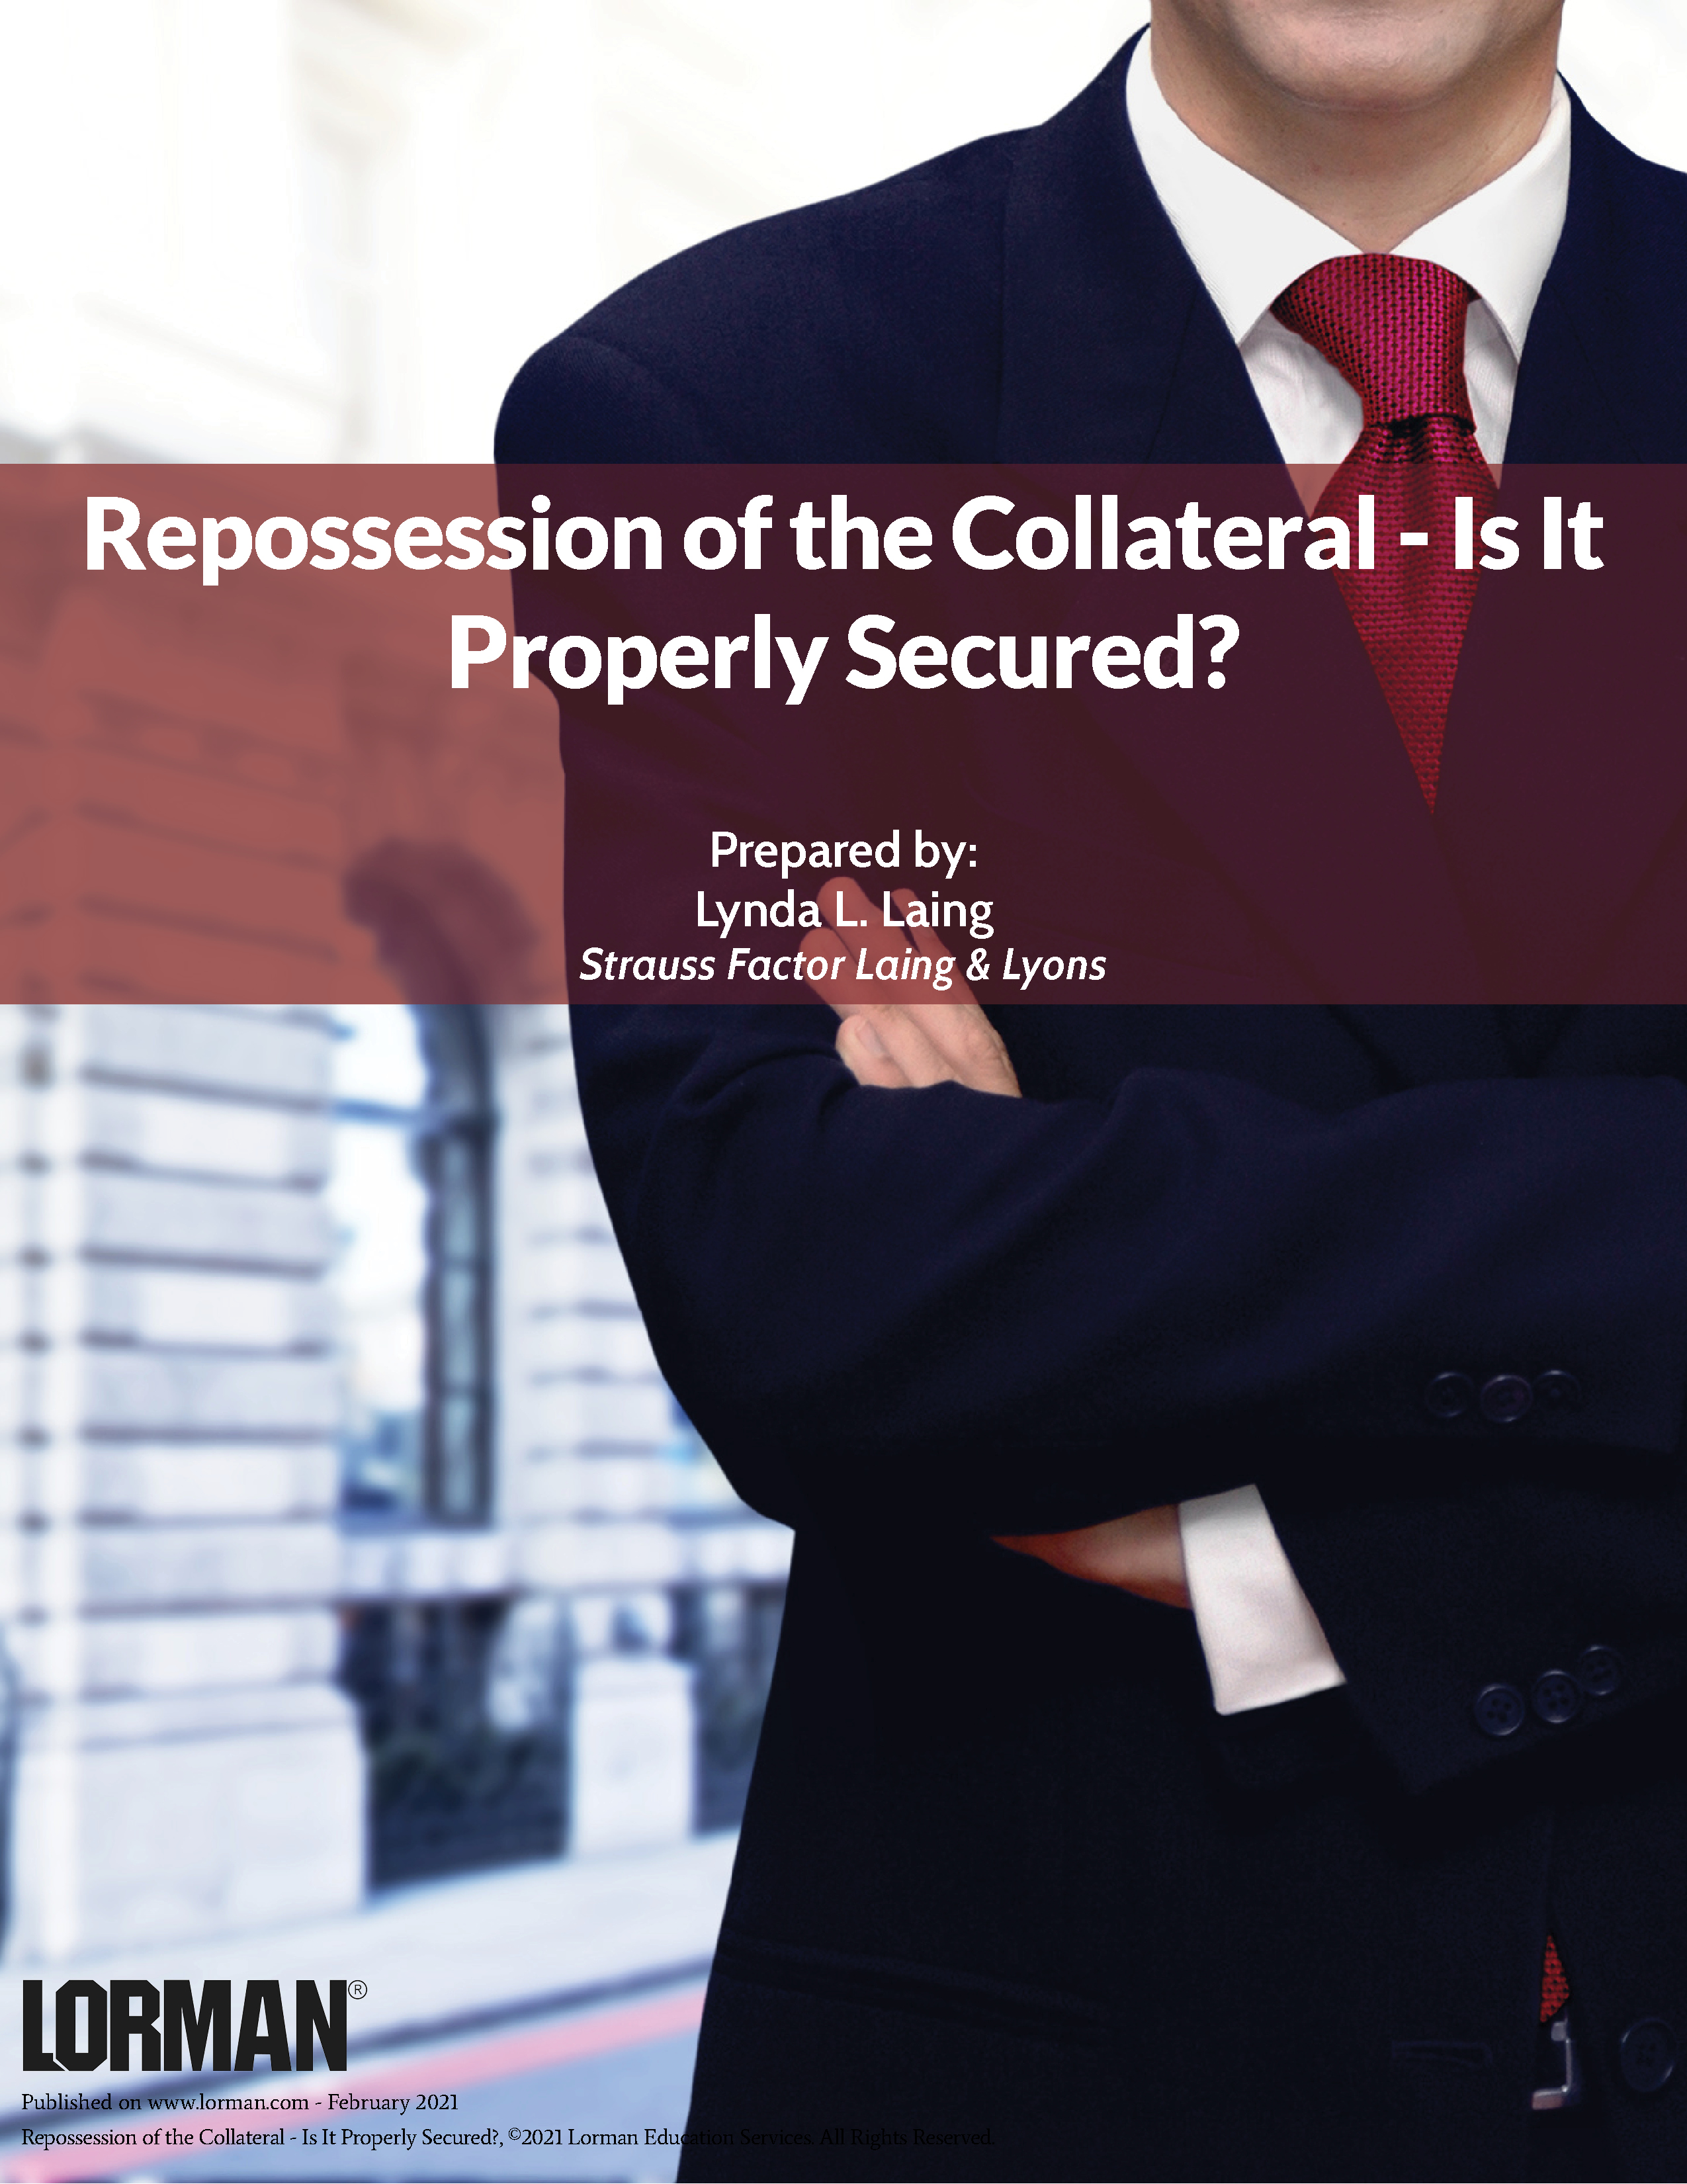 Repossession of the Collateral - Is It Properly Secured?